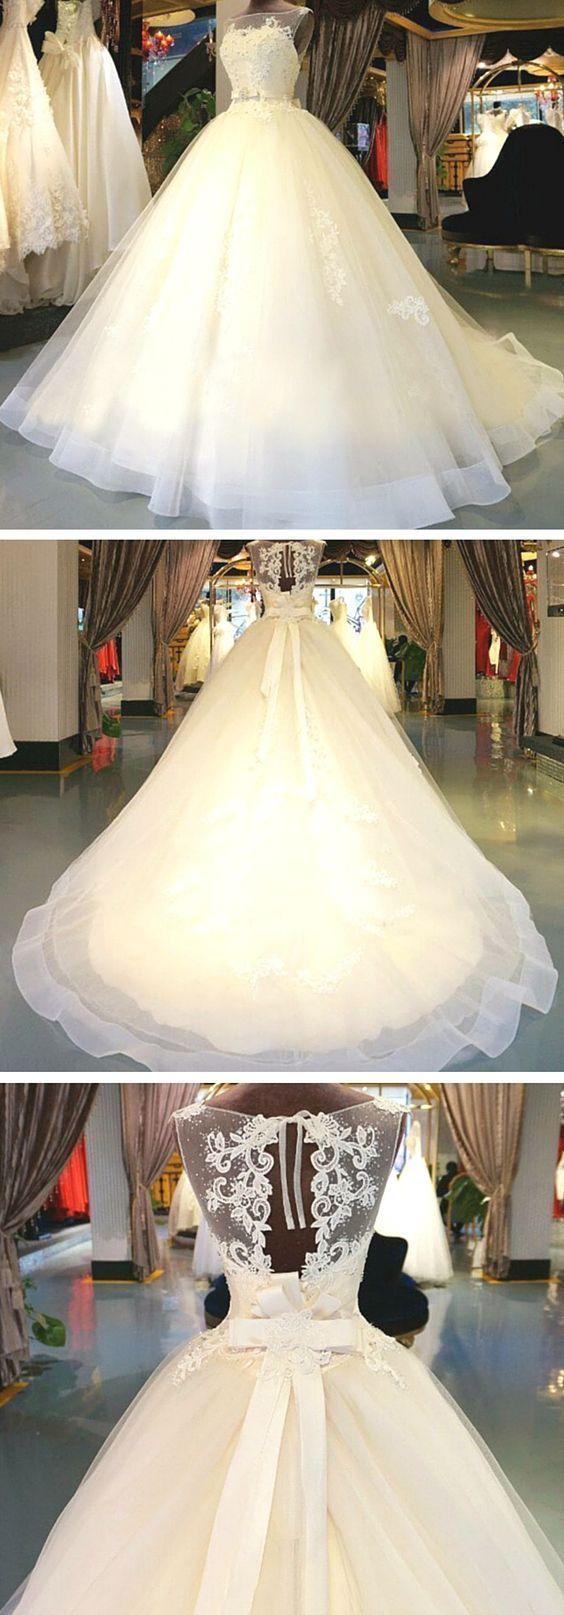 Свадьба - Princess Ball Gown White Tulle Skirt Lace Bodice Wedding Gowns Wedding Dresses Unique Wedding Dress Bride Gowns